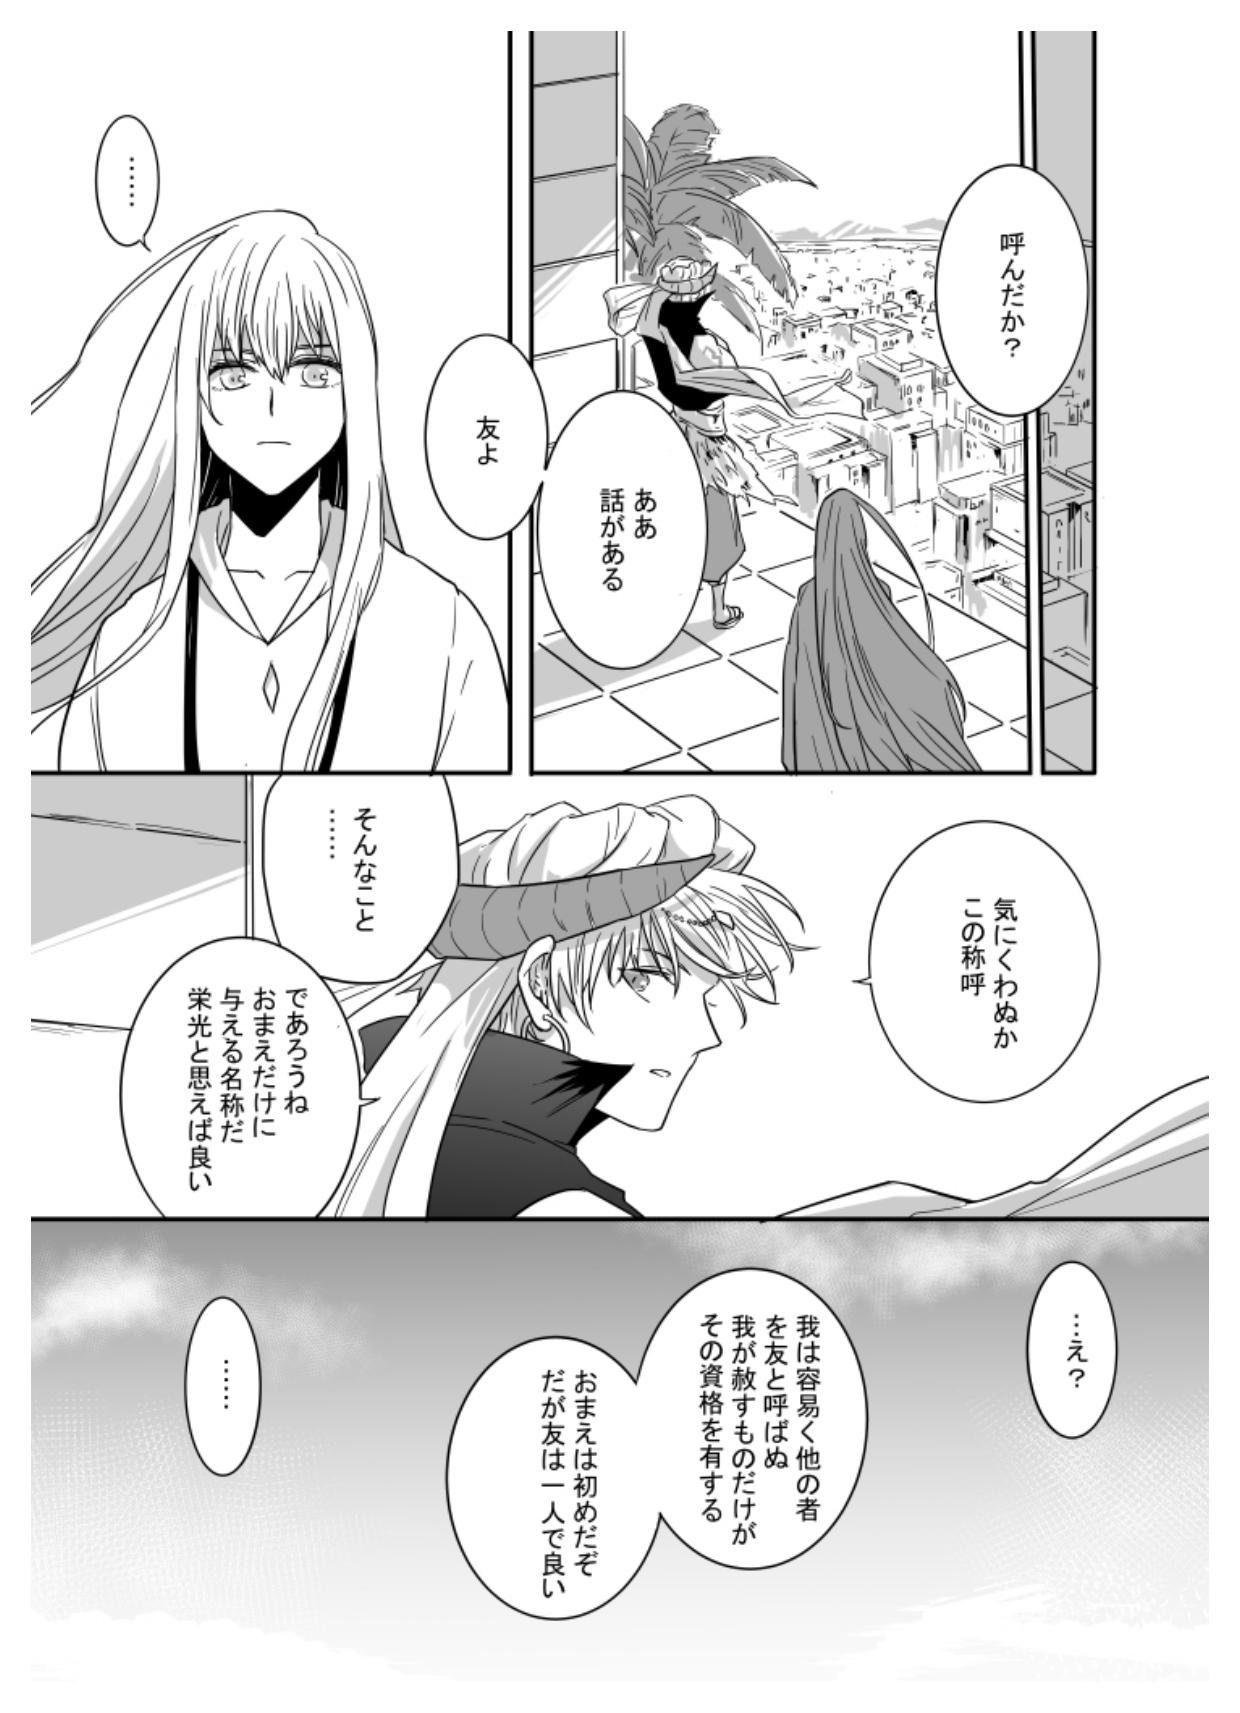 Lolicon If I have soul - Fate grand order Uncut - Page 11